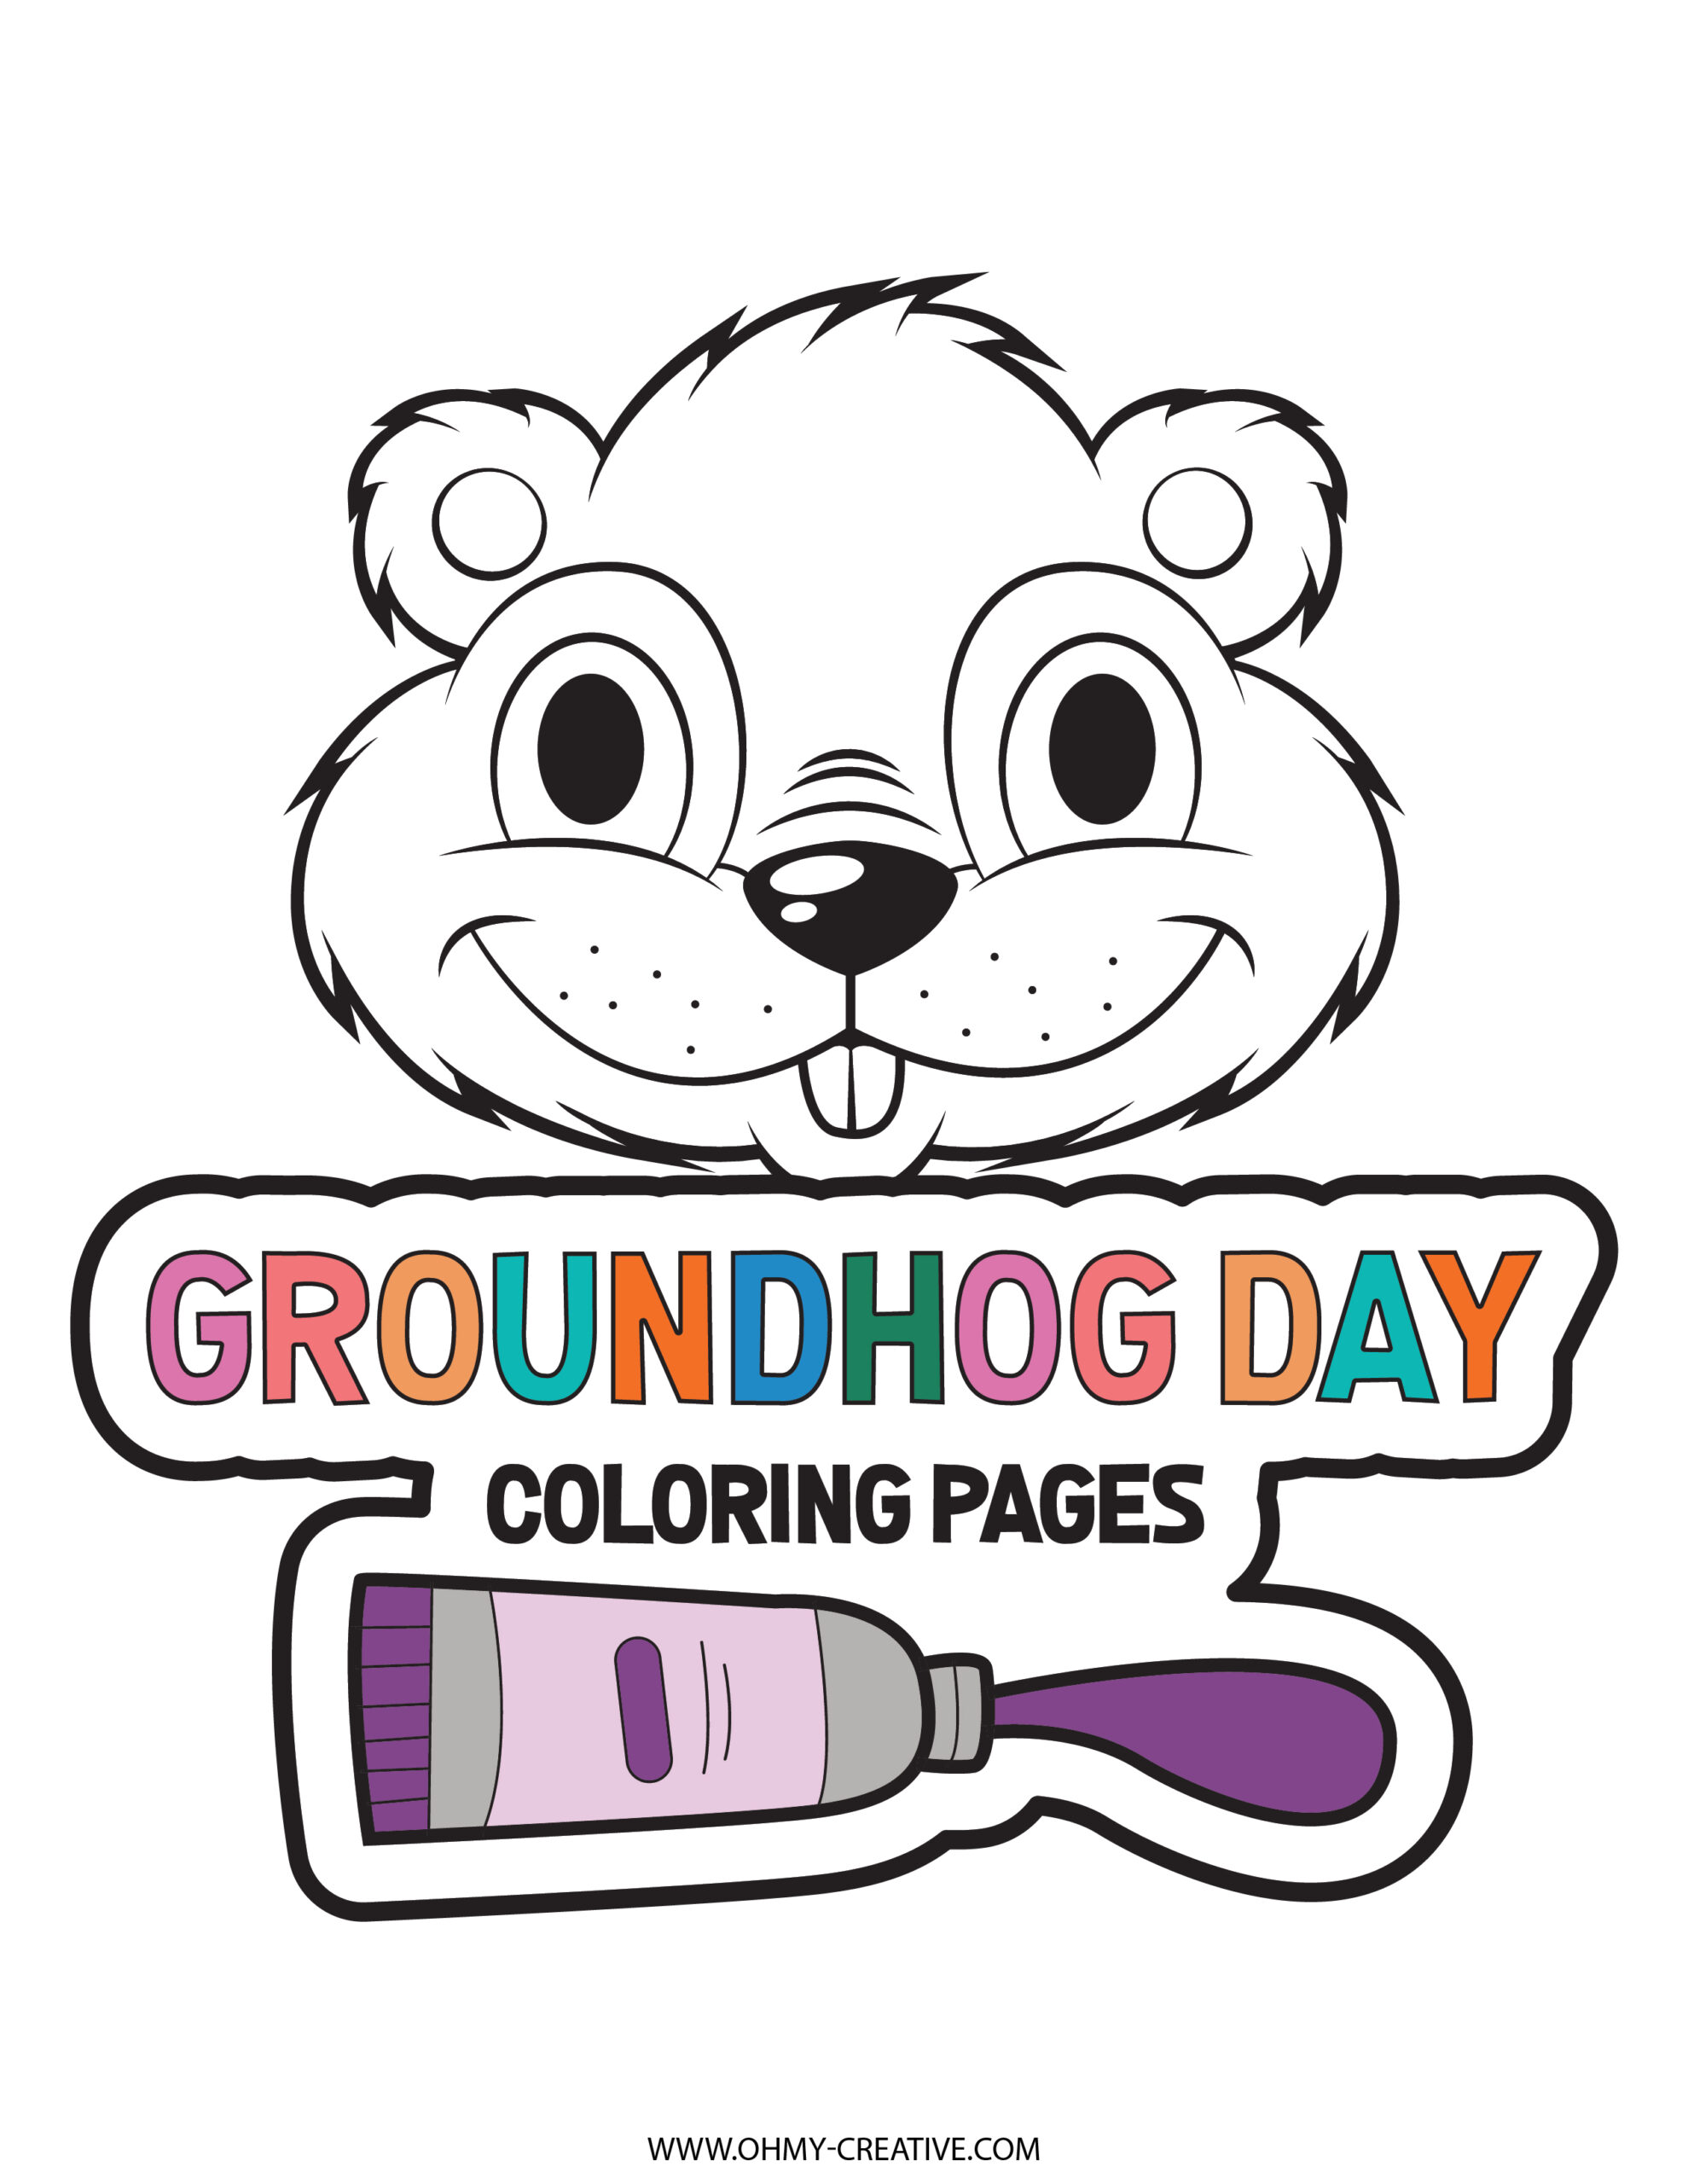 A cute head of a ground hog for groundhog day coloring pages.